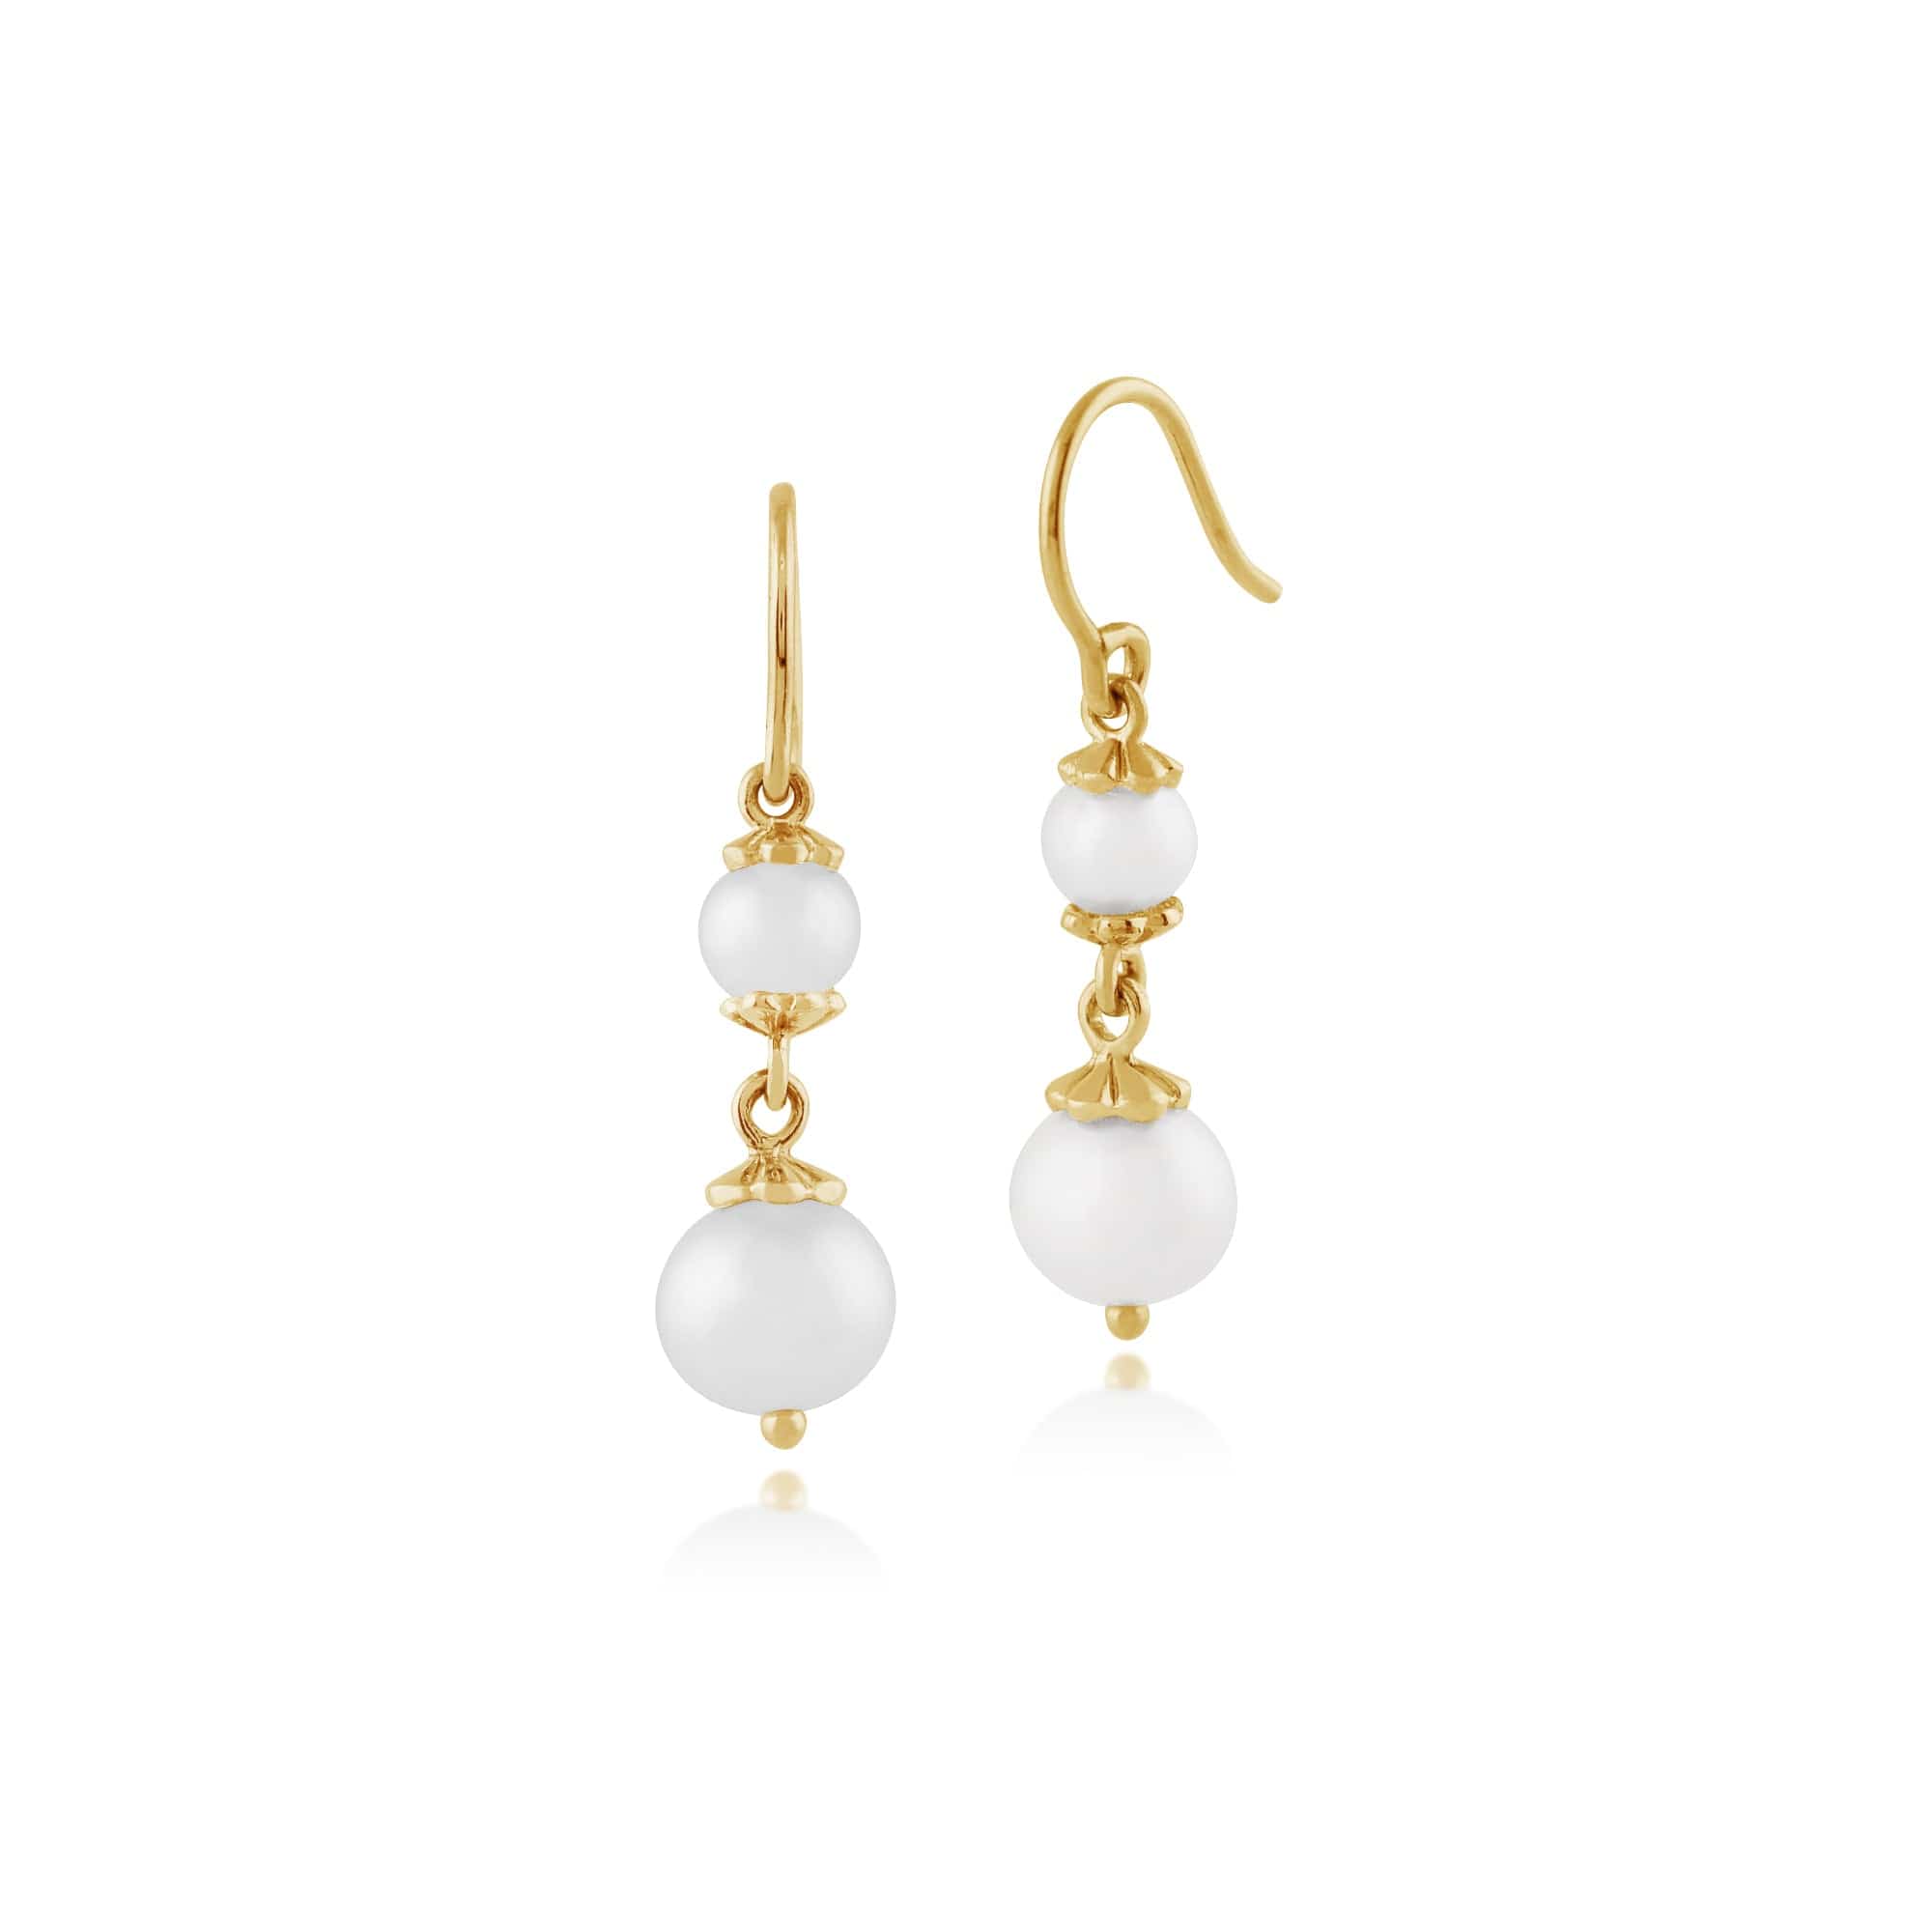 Gemondo 925 Gold Plated Sterling Silver 3.32ct Freshwater Pearl Drop Earrings Image